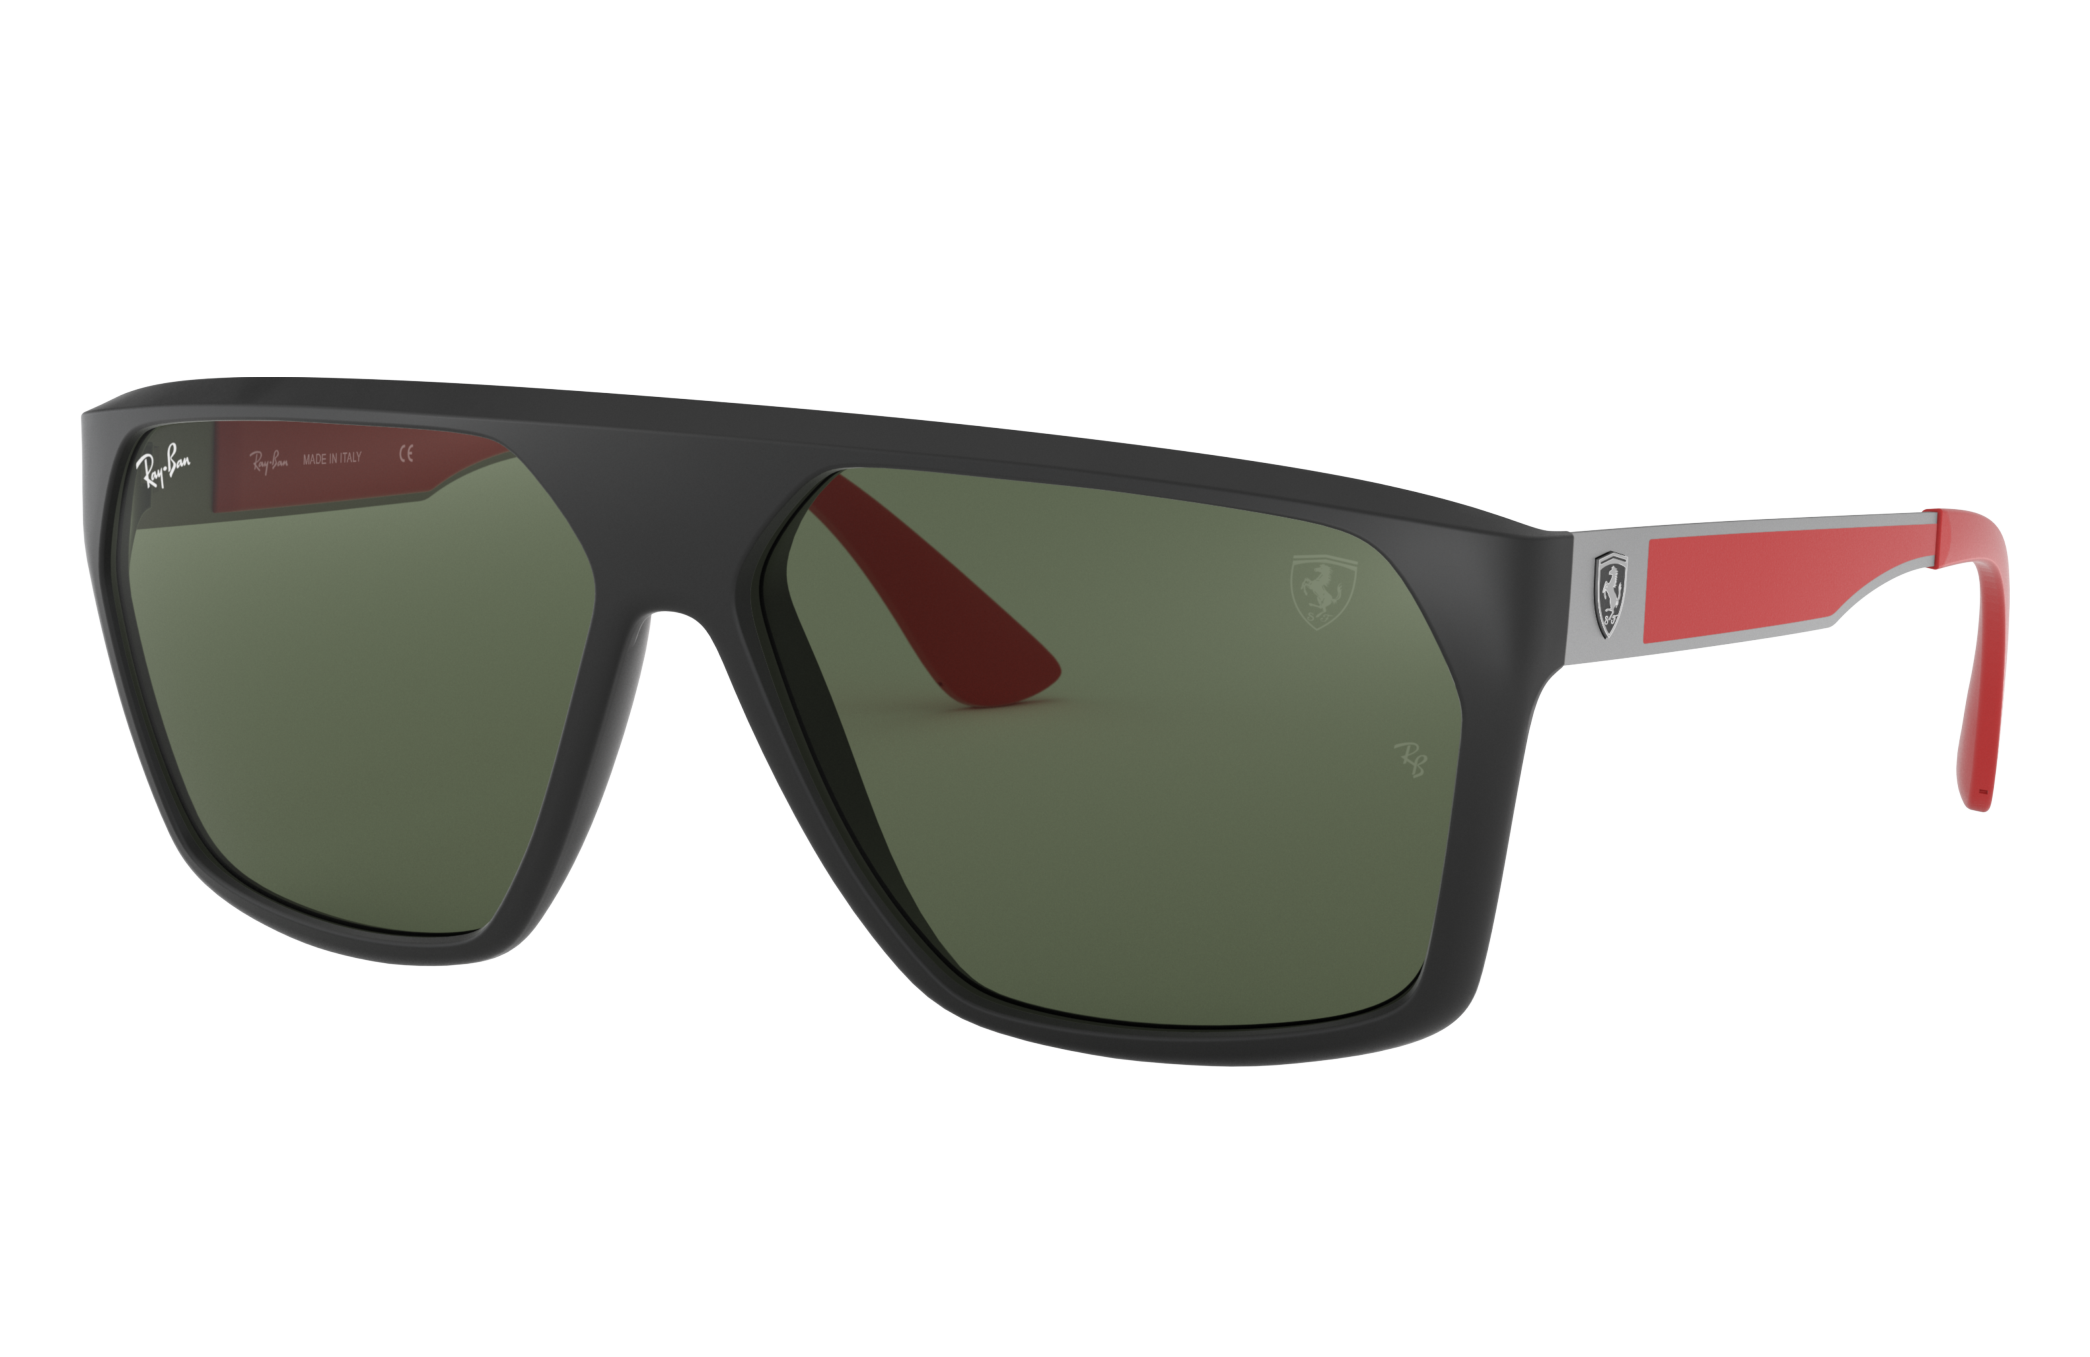 Schipbreuk Voorspeller vuilnis Rb4309m Scuderia Ferrari Collection Sunglasses in Black and Green - RB4309M  | Ray-Ban® US